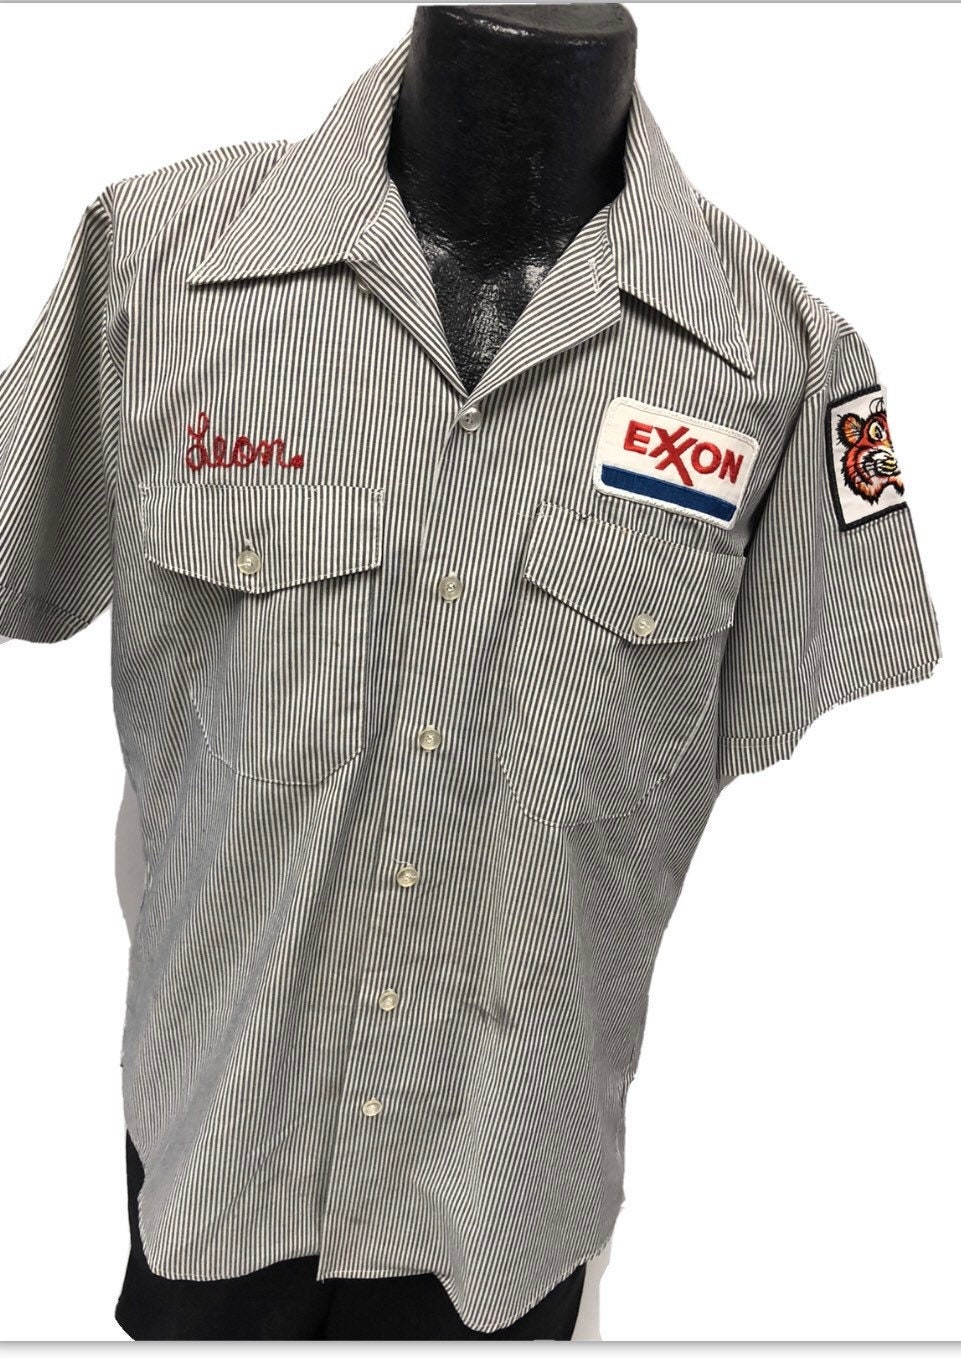 LT-4XLT New Texaco Gasoline Vintage Old Logo Embroidered Mens Polo Shirt S-6XL 